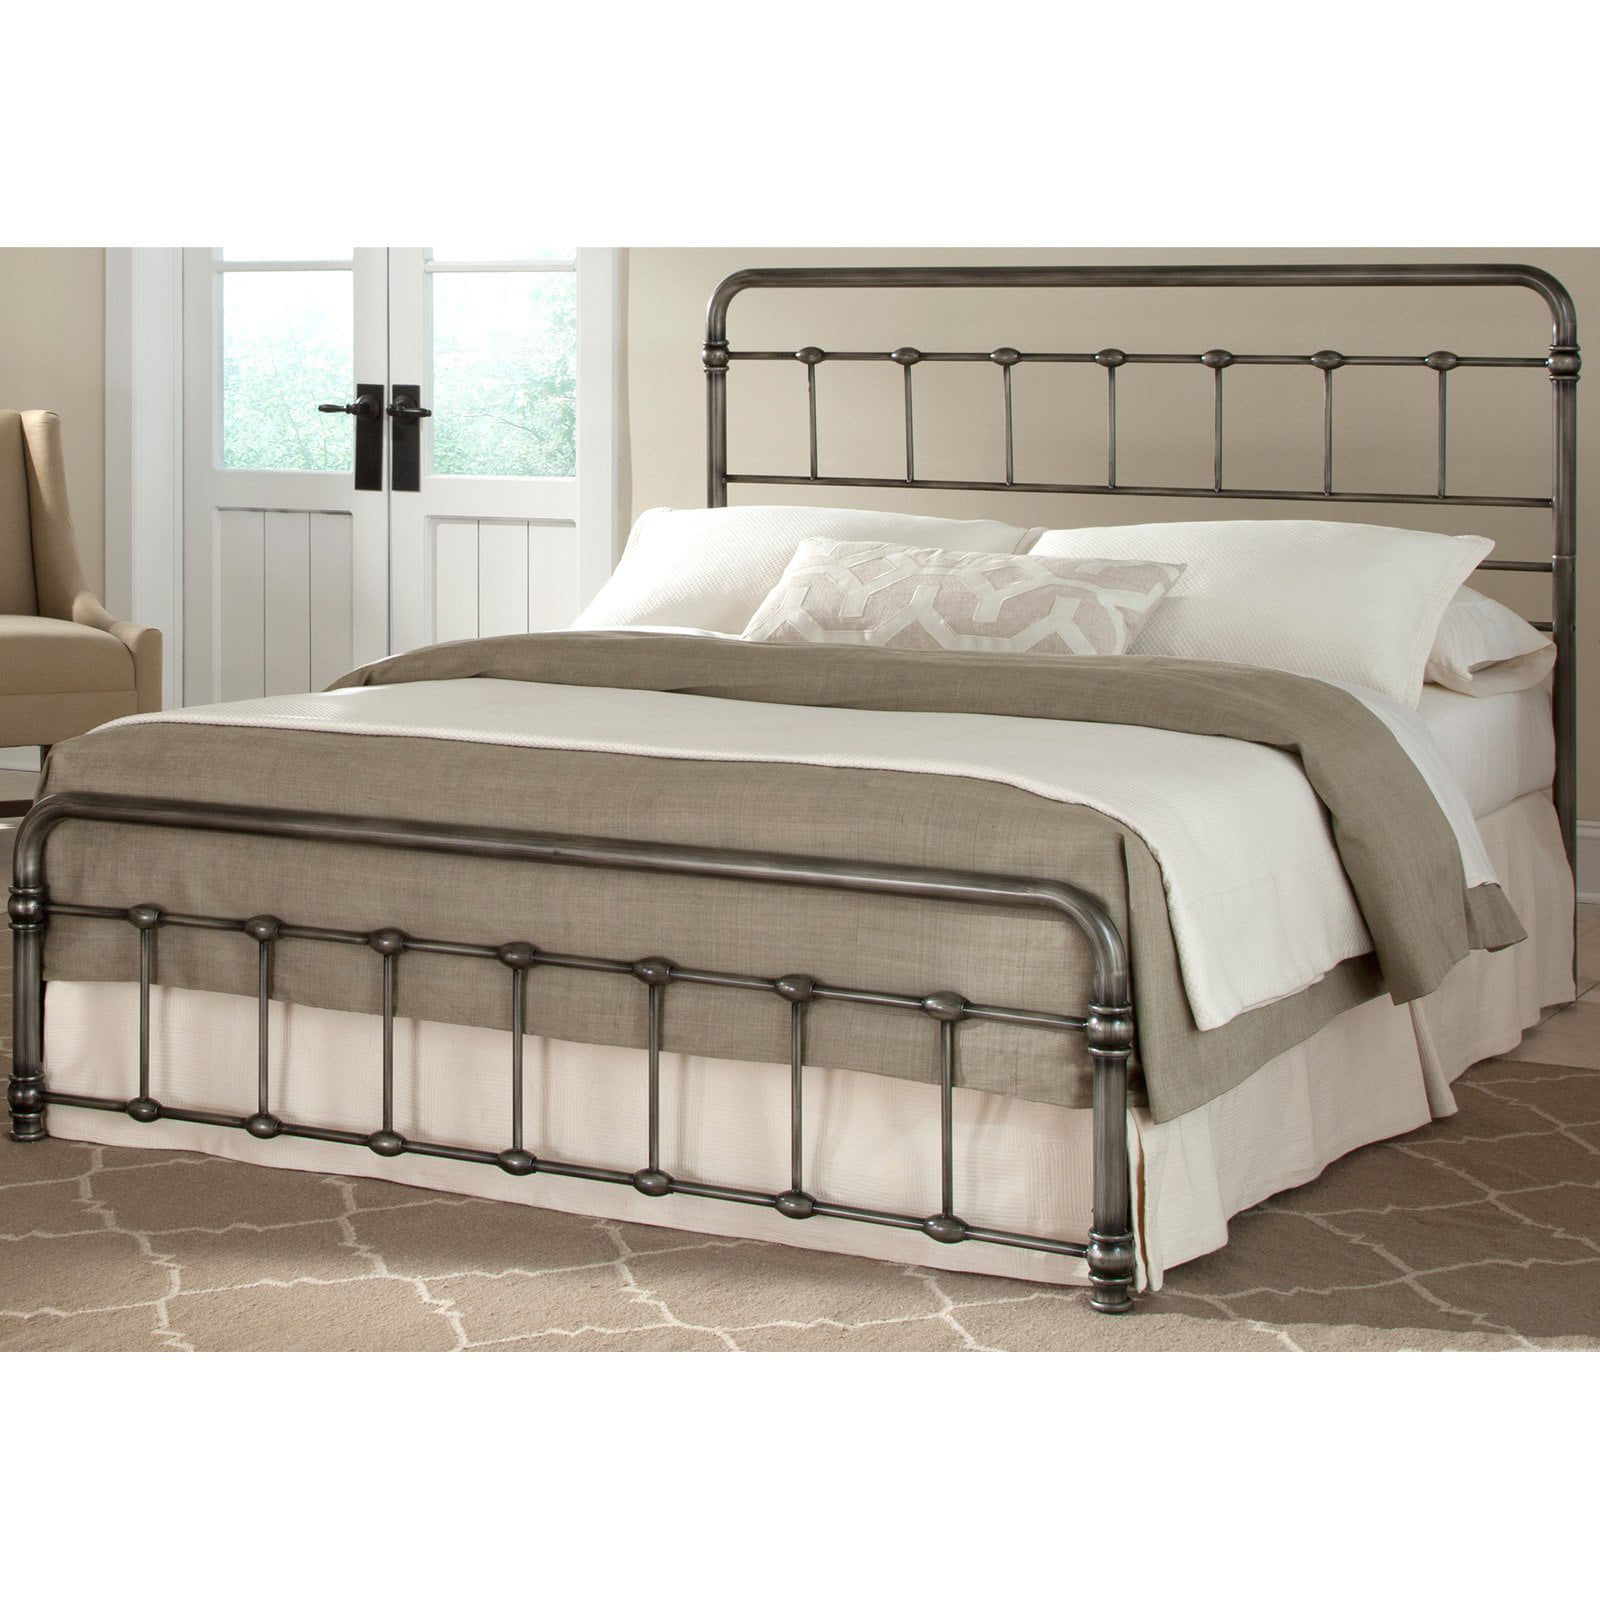 Fremont Metal Snap Bed With Folding, Fashion Bed Group Metal Frame Instructions